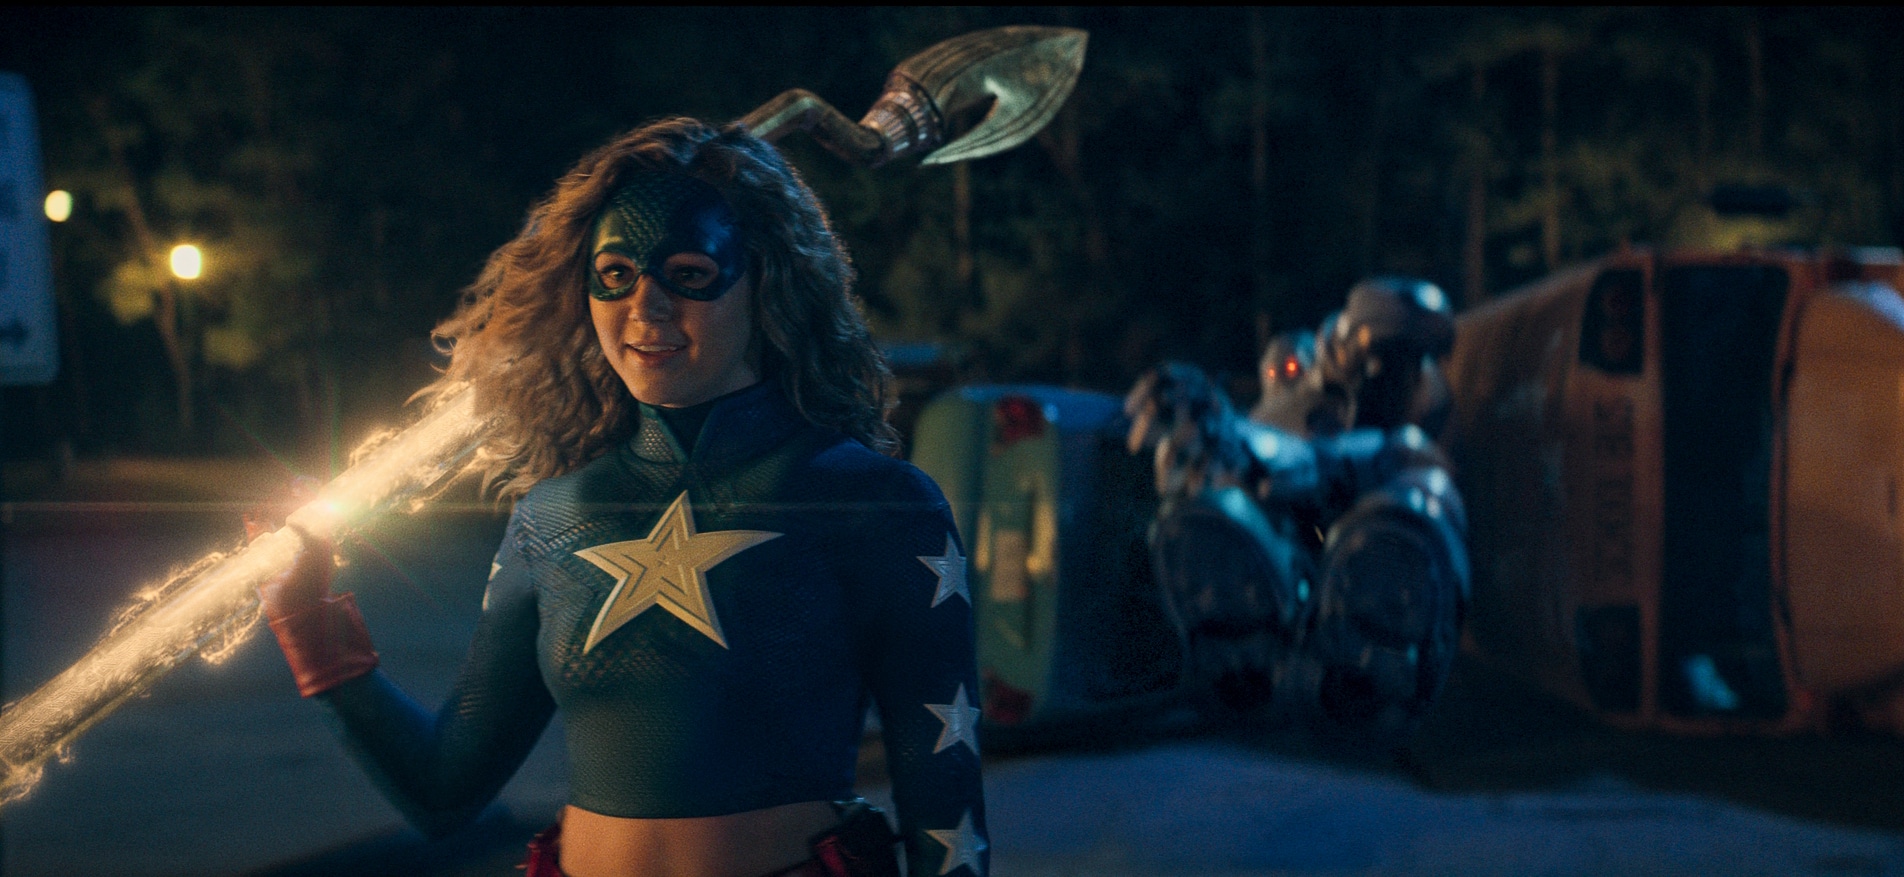 Stargirl Pilot Review: A Charming Addition